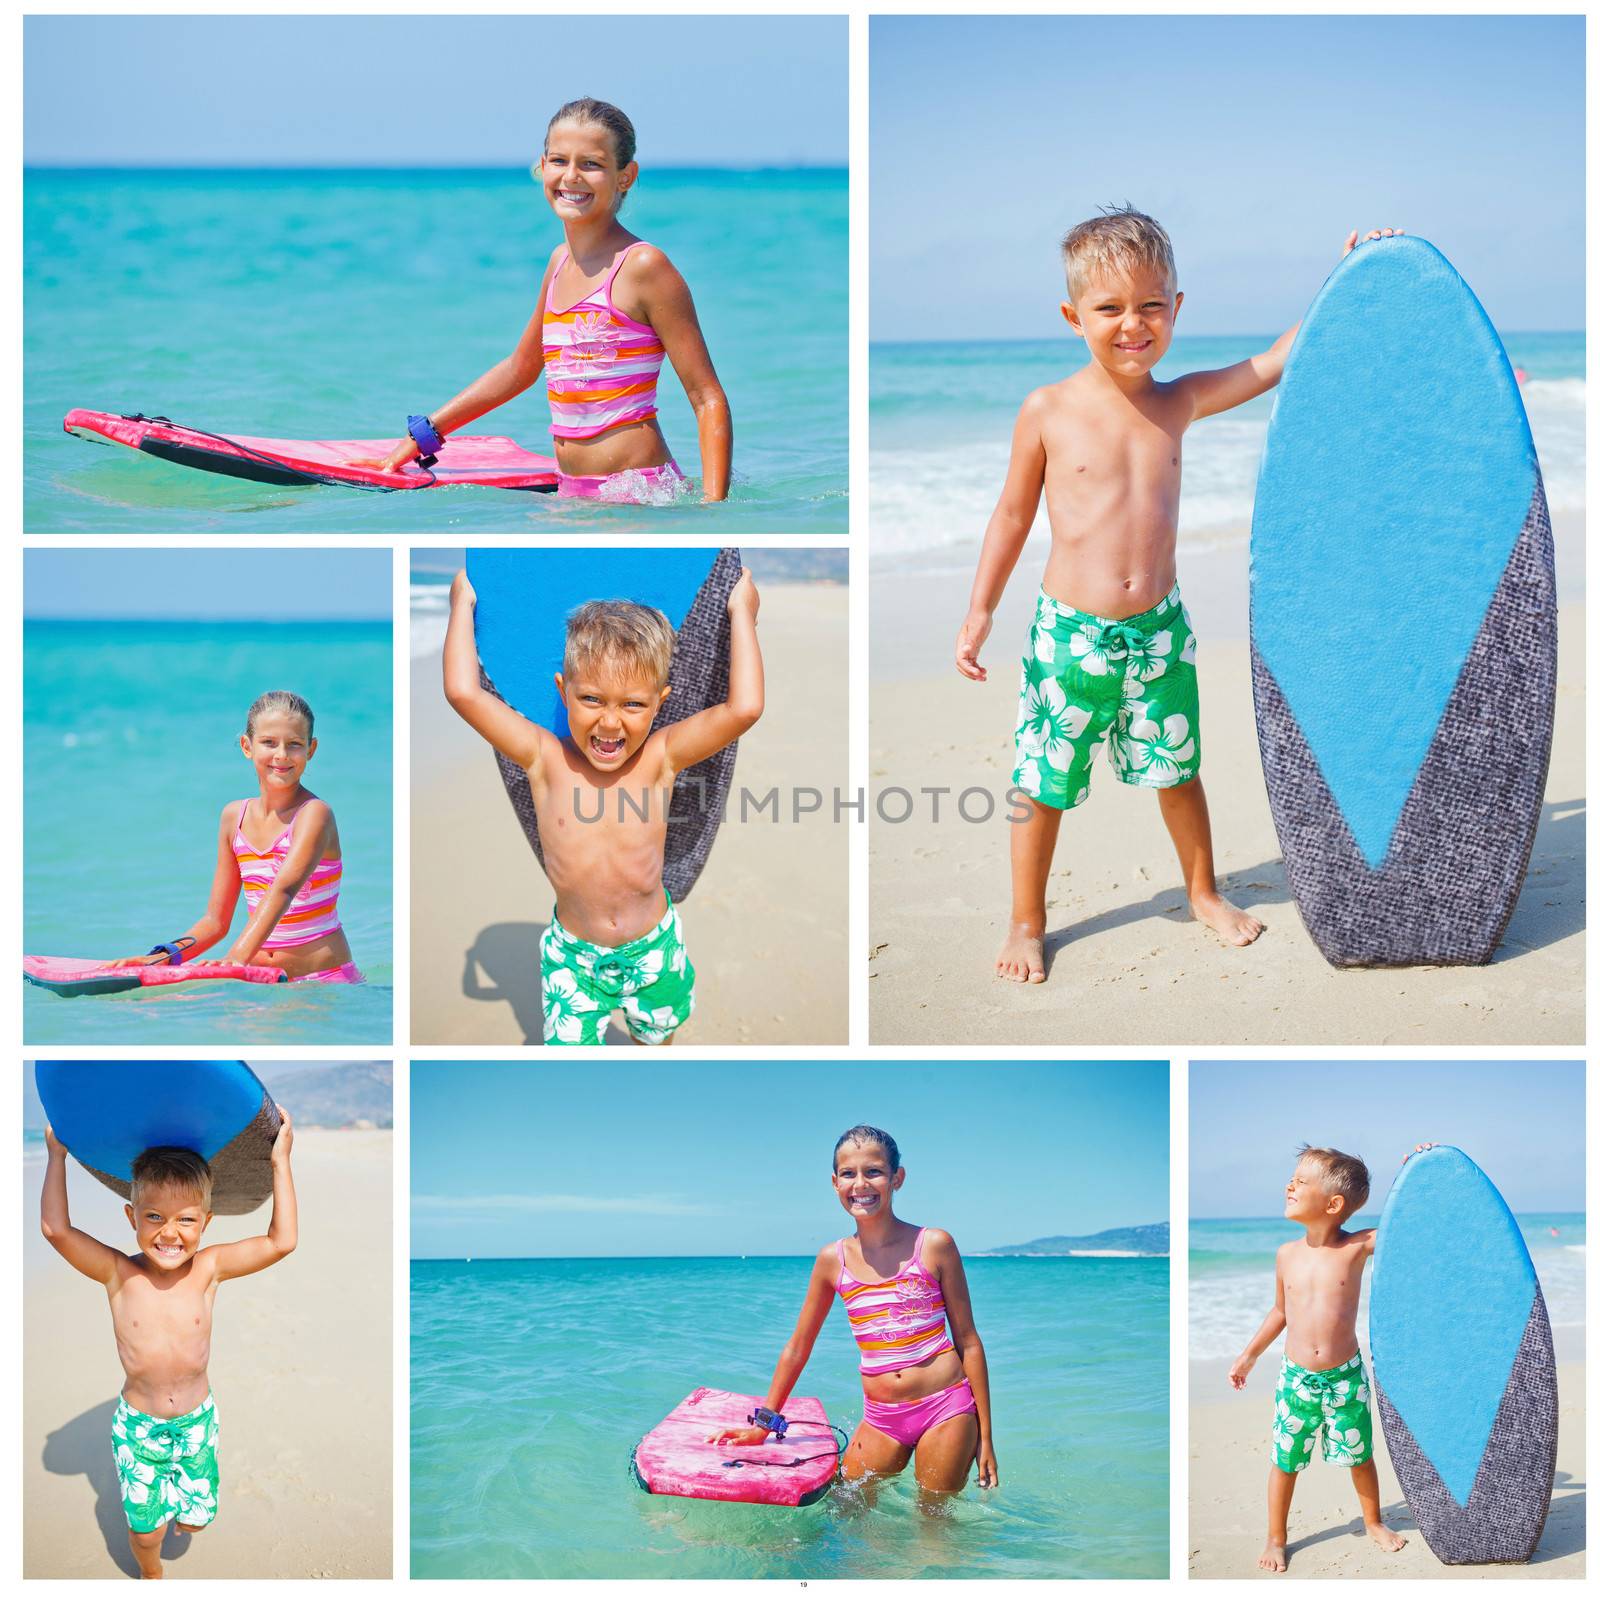 Collage of images little surfers. Cute boy and girl with surfboard standing near ocean.